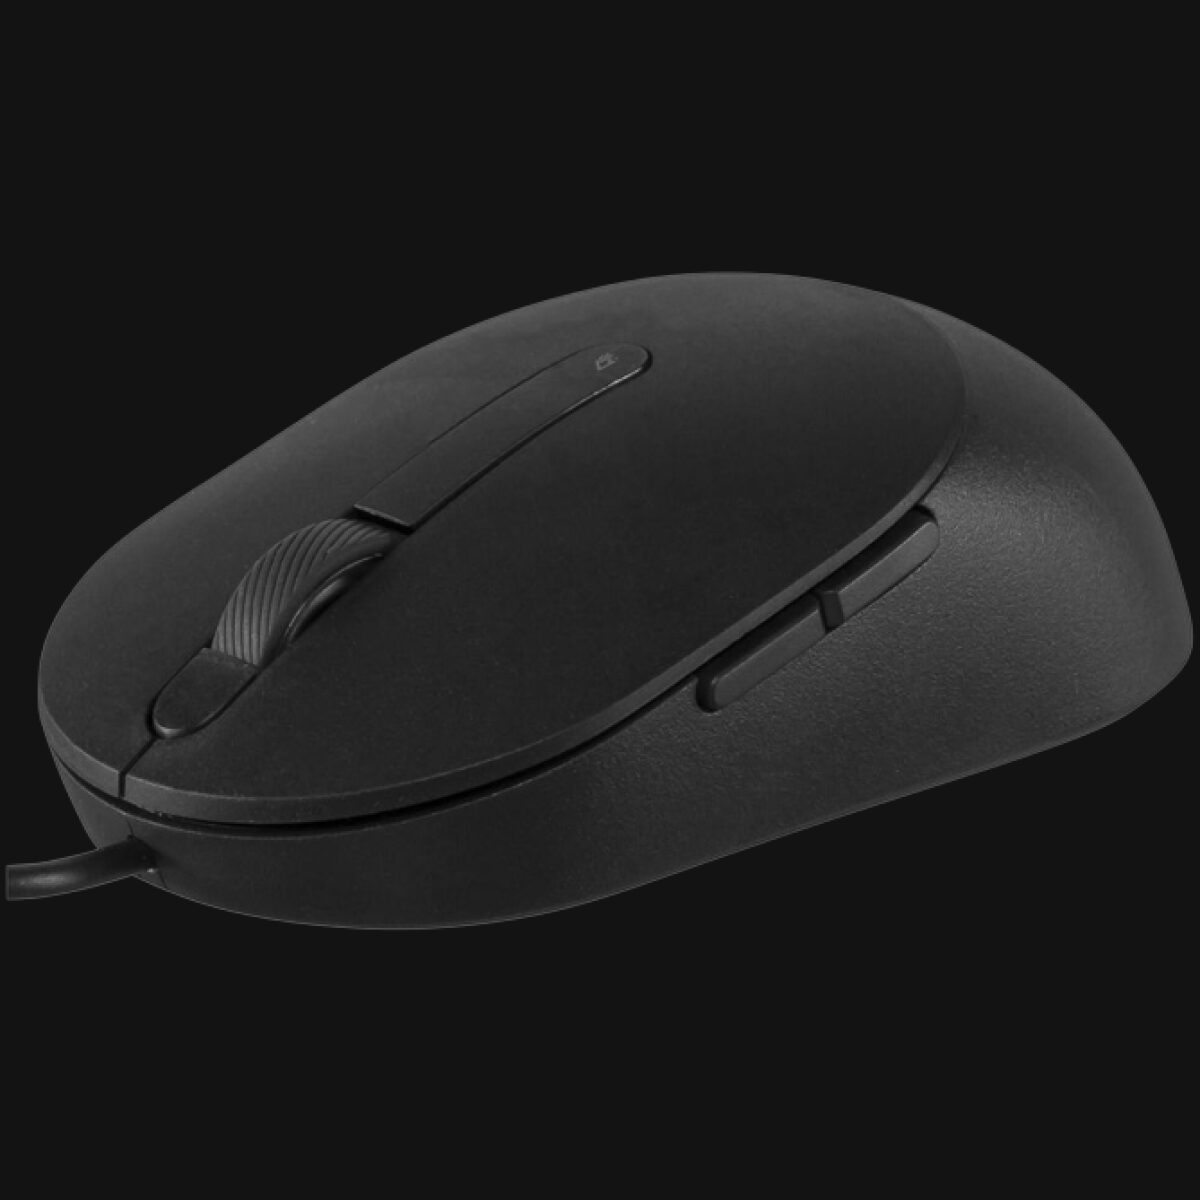 DELL BLACK WIRED USB MOUSE LO300 SCROLL WHEEL – computech